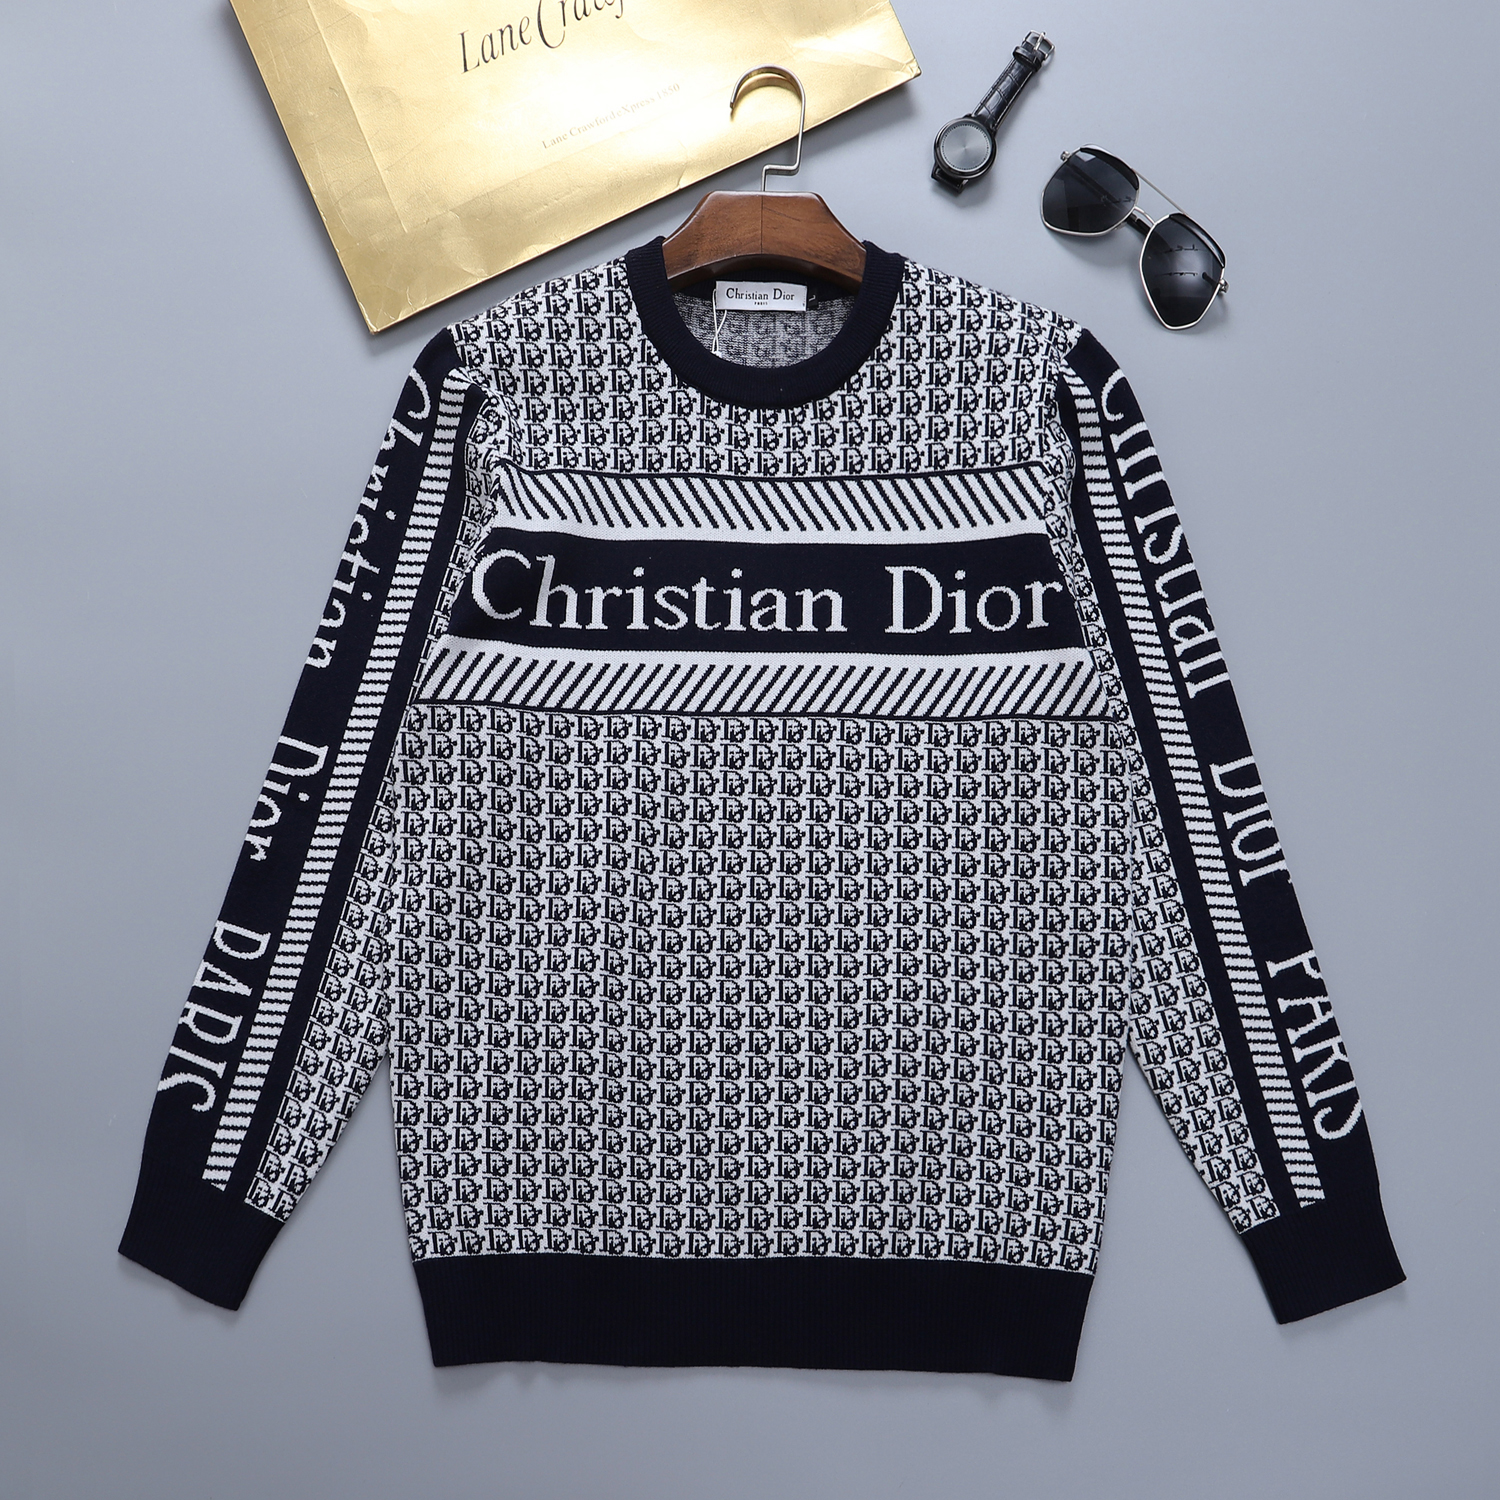 2021 Dior Sweaters For Men in 243608, cheap Dior Sweaters, only $45!